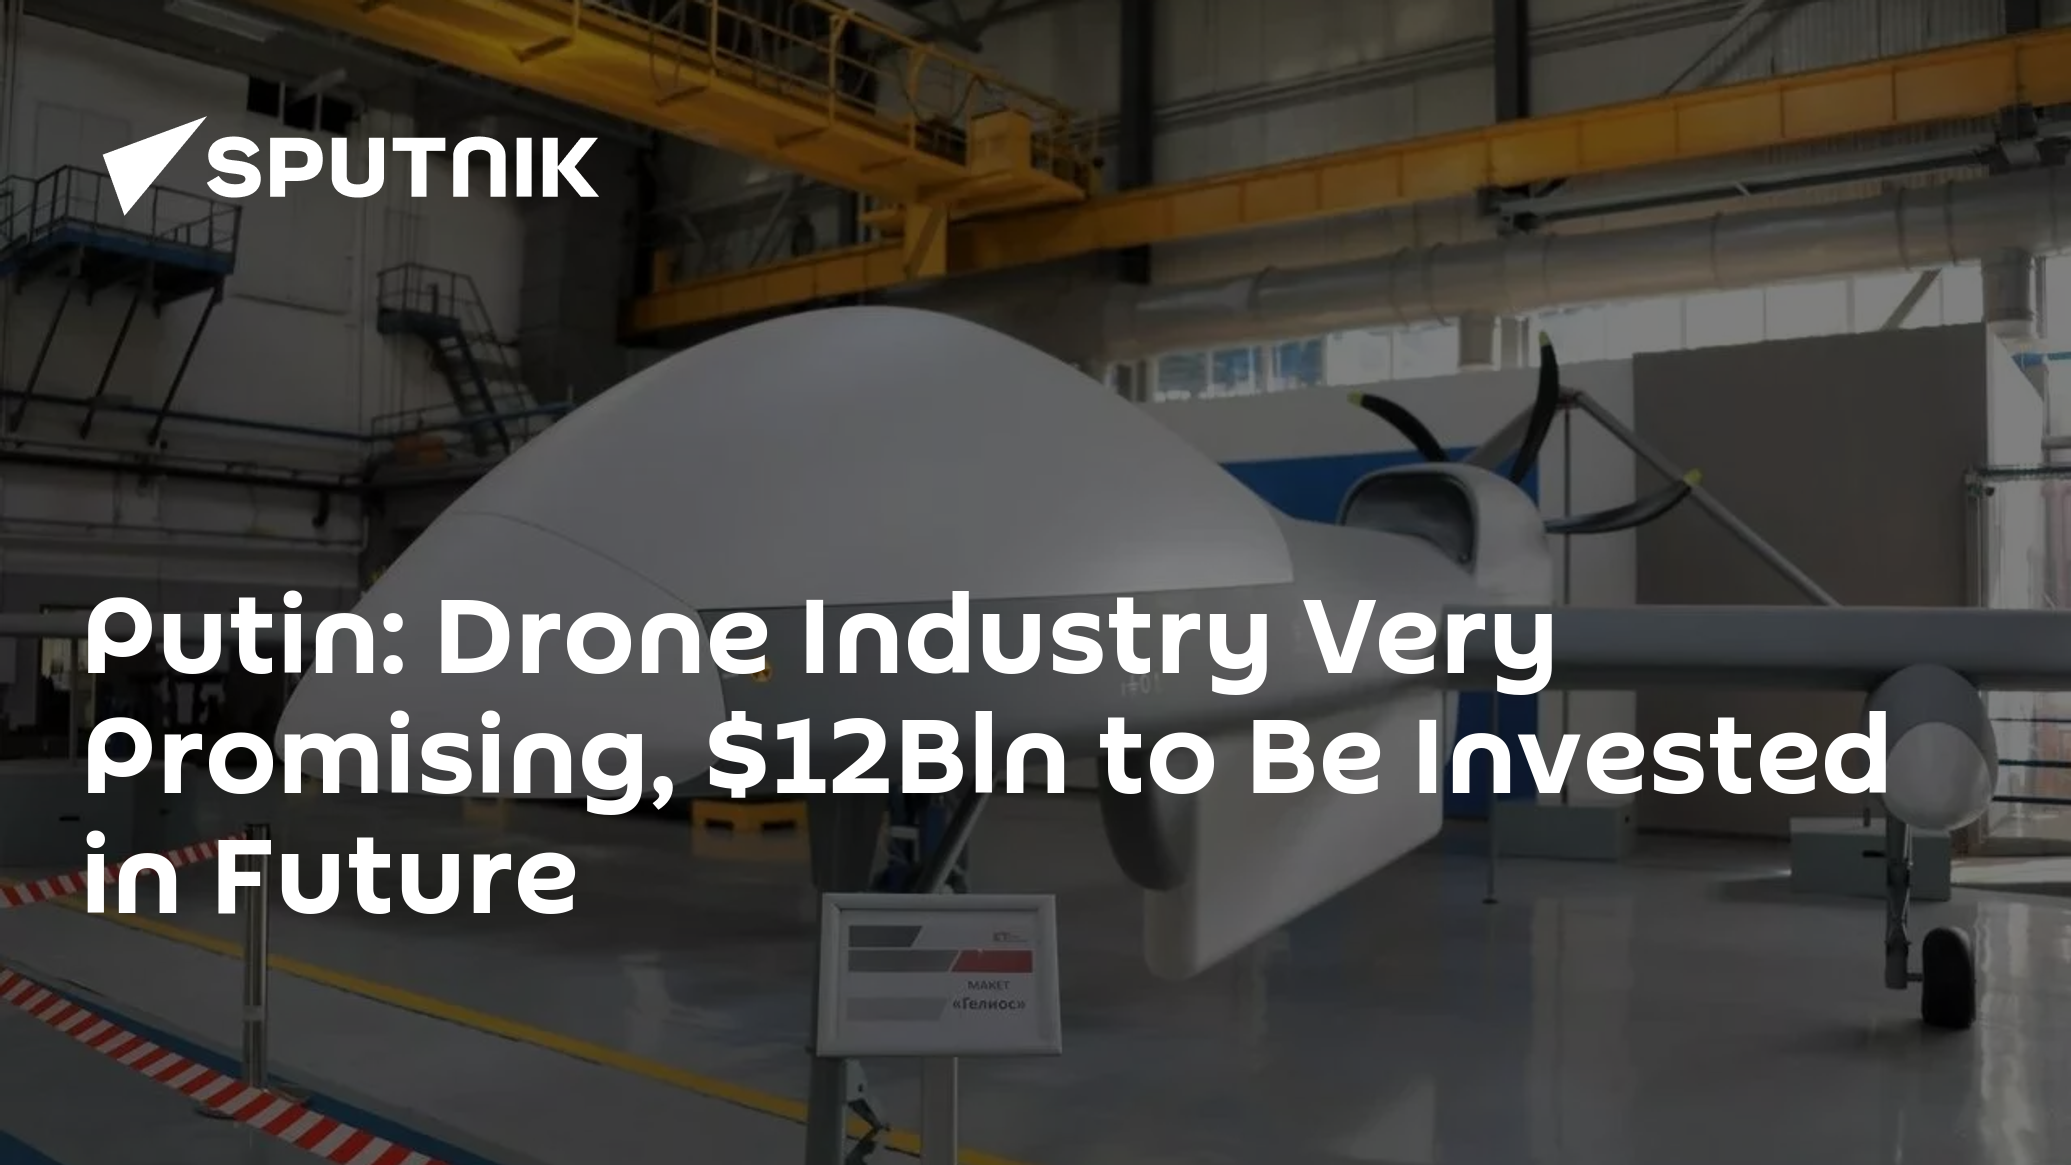 Putin: Drone Industry Very Promising, Bln to Be Invested in Future